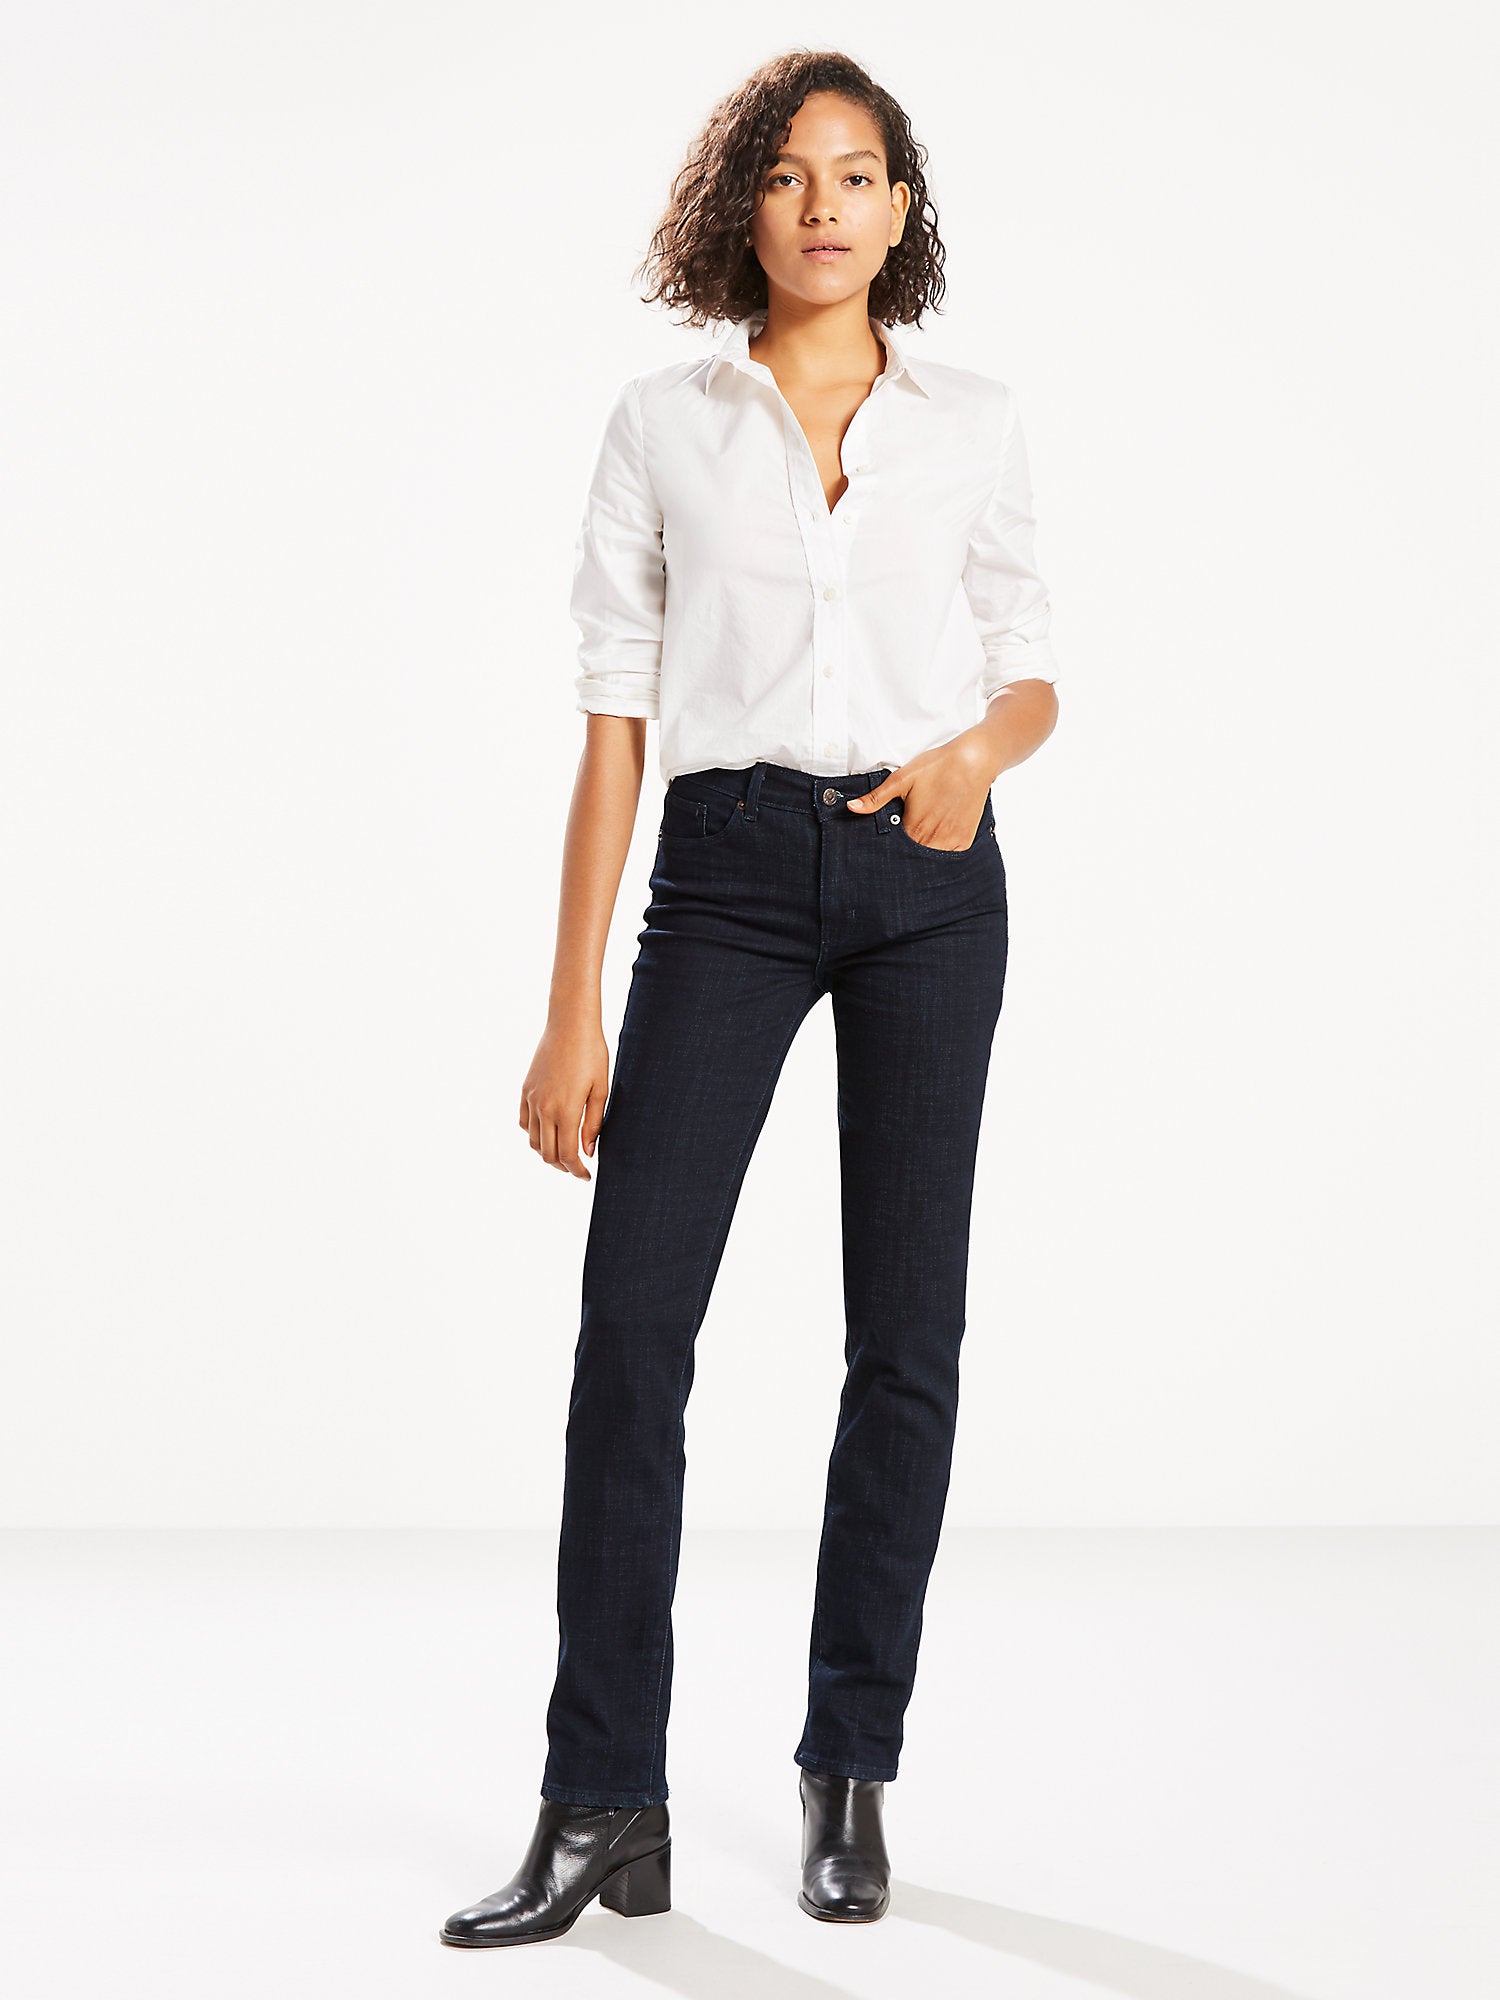 Friday Sale 2019 Womens Jeans & More Deals